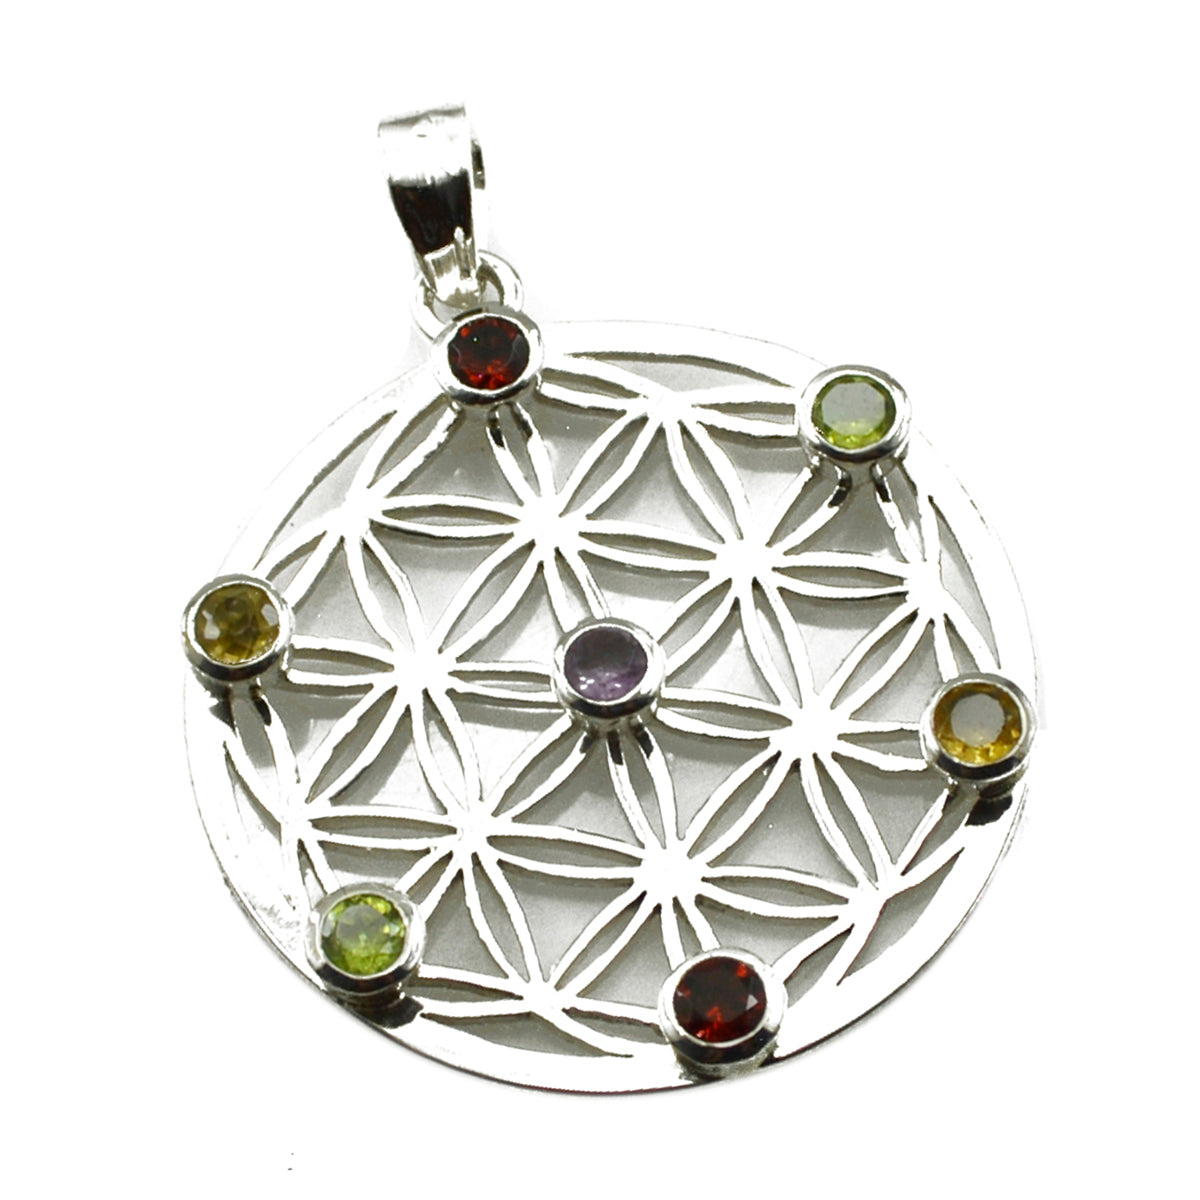 Riyo Delightful Gemstone Round Faceted Multi Color Multi Stone 1022 Sterling Silver Pendant Gift For Good Friday